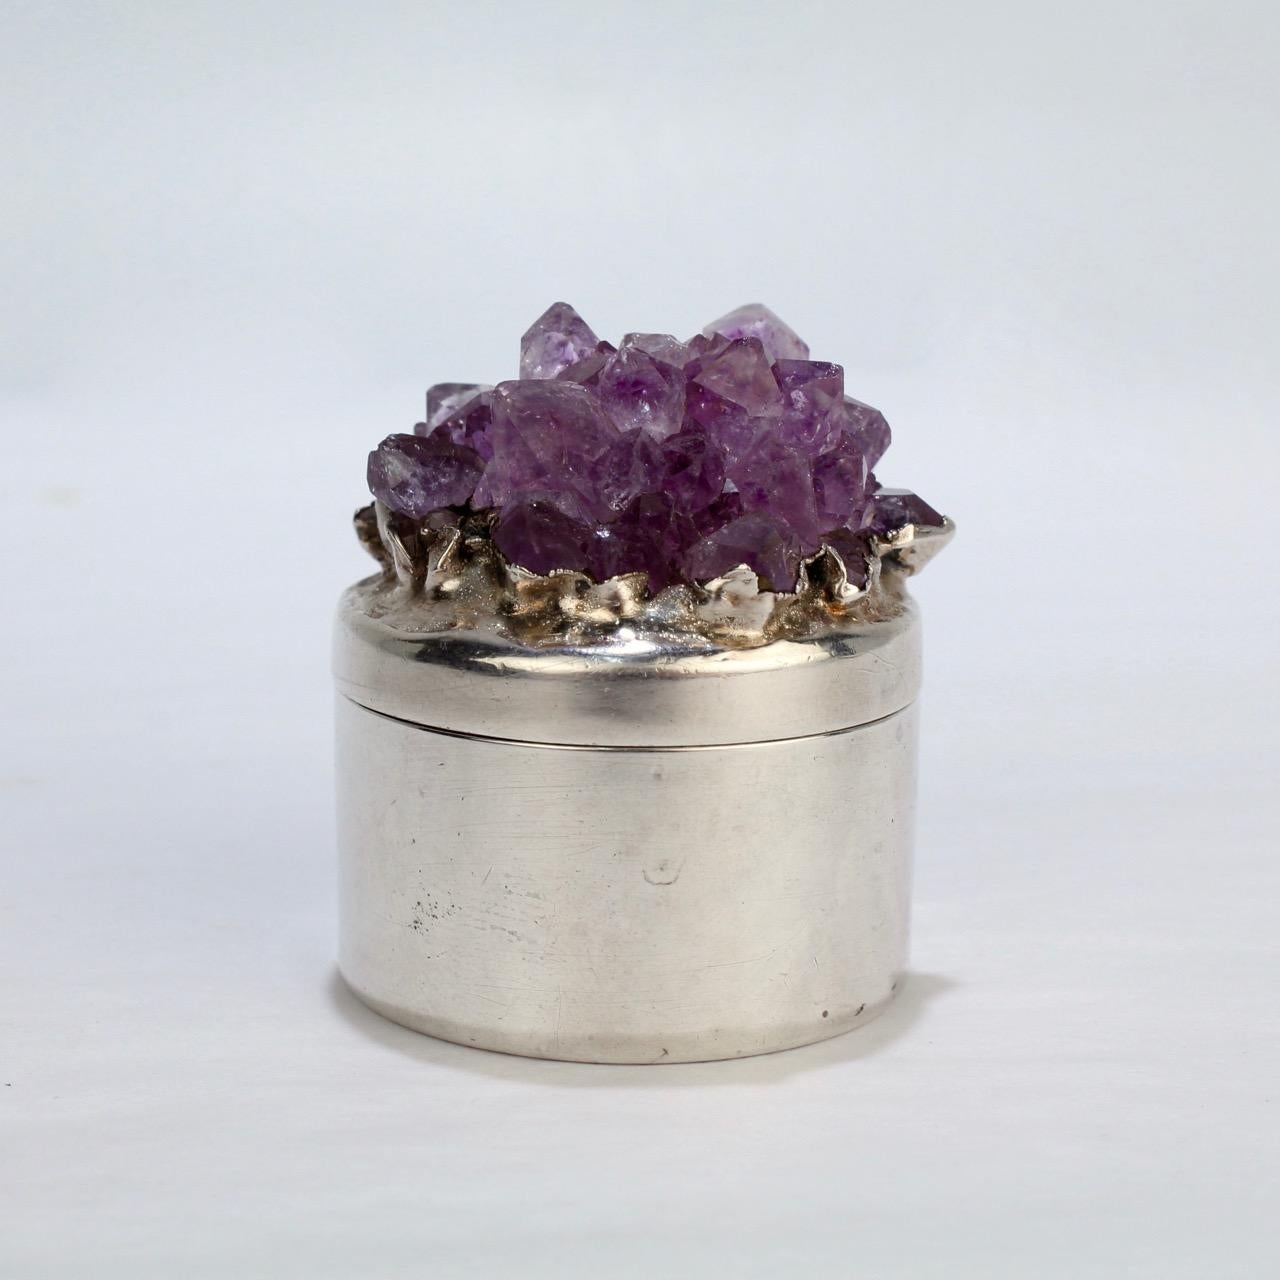 A very good modernist English sterling silver and amethyst covered dresser box.

The lid is set with amethyst gemstones in the manner of Stuart Devlin.

The base is marked for London, sterling silver, 1970, and with a maker's mark SL.

Diameter: ca.